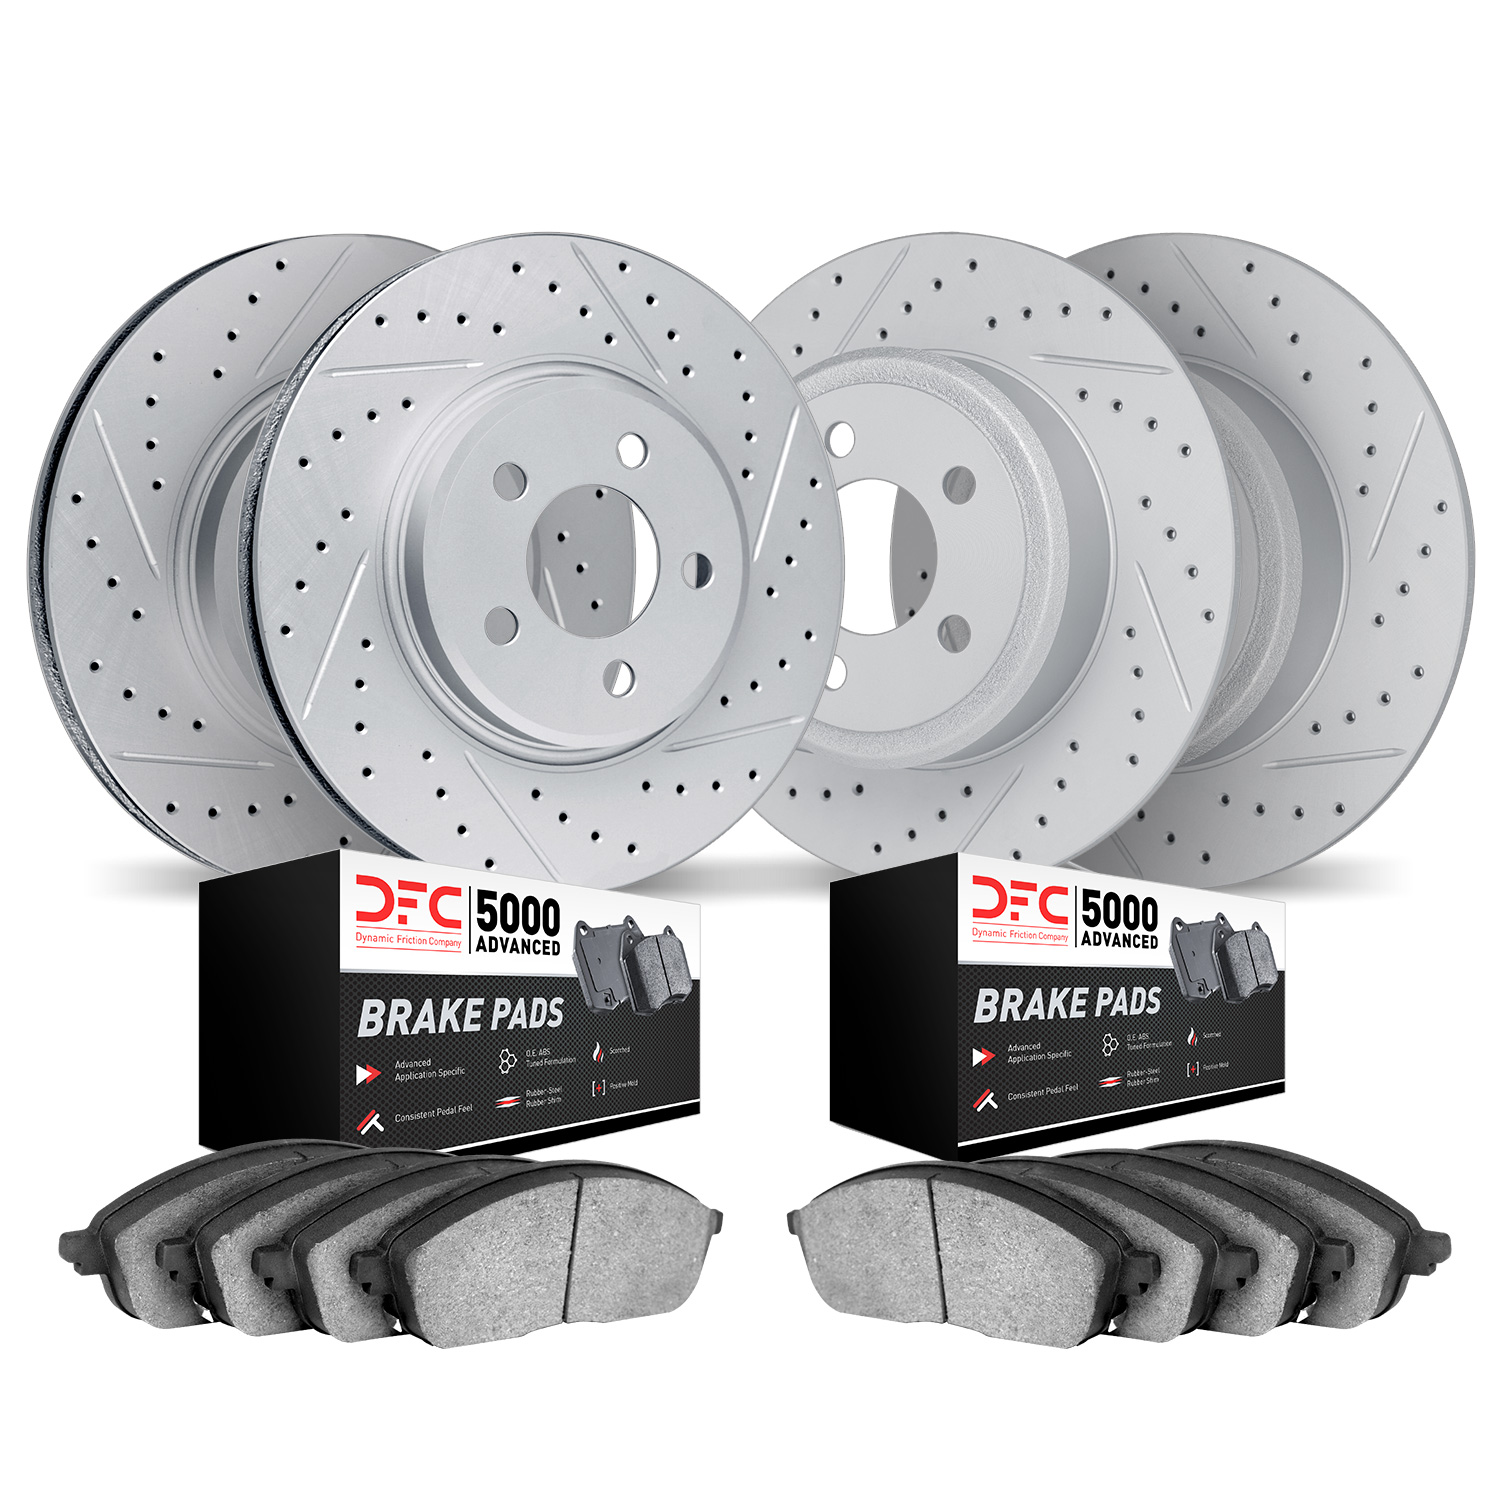 2504-76094 Geoperformance Drilled/Slotted Rotors w/5000 Advanced Brake Pads Kit, 2004-2007 Lexus/Toyota/Scion, Position: Front a